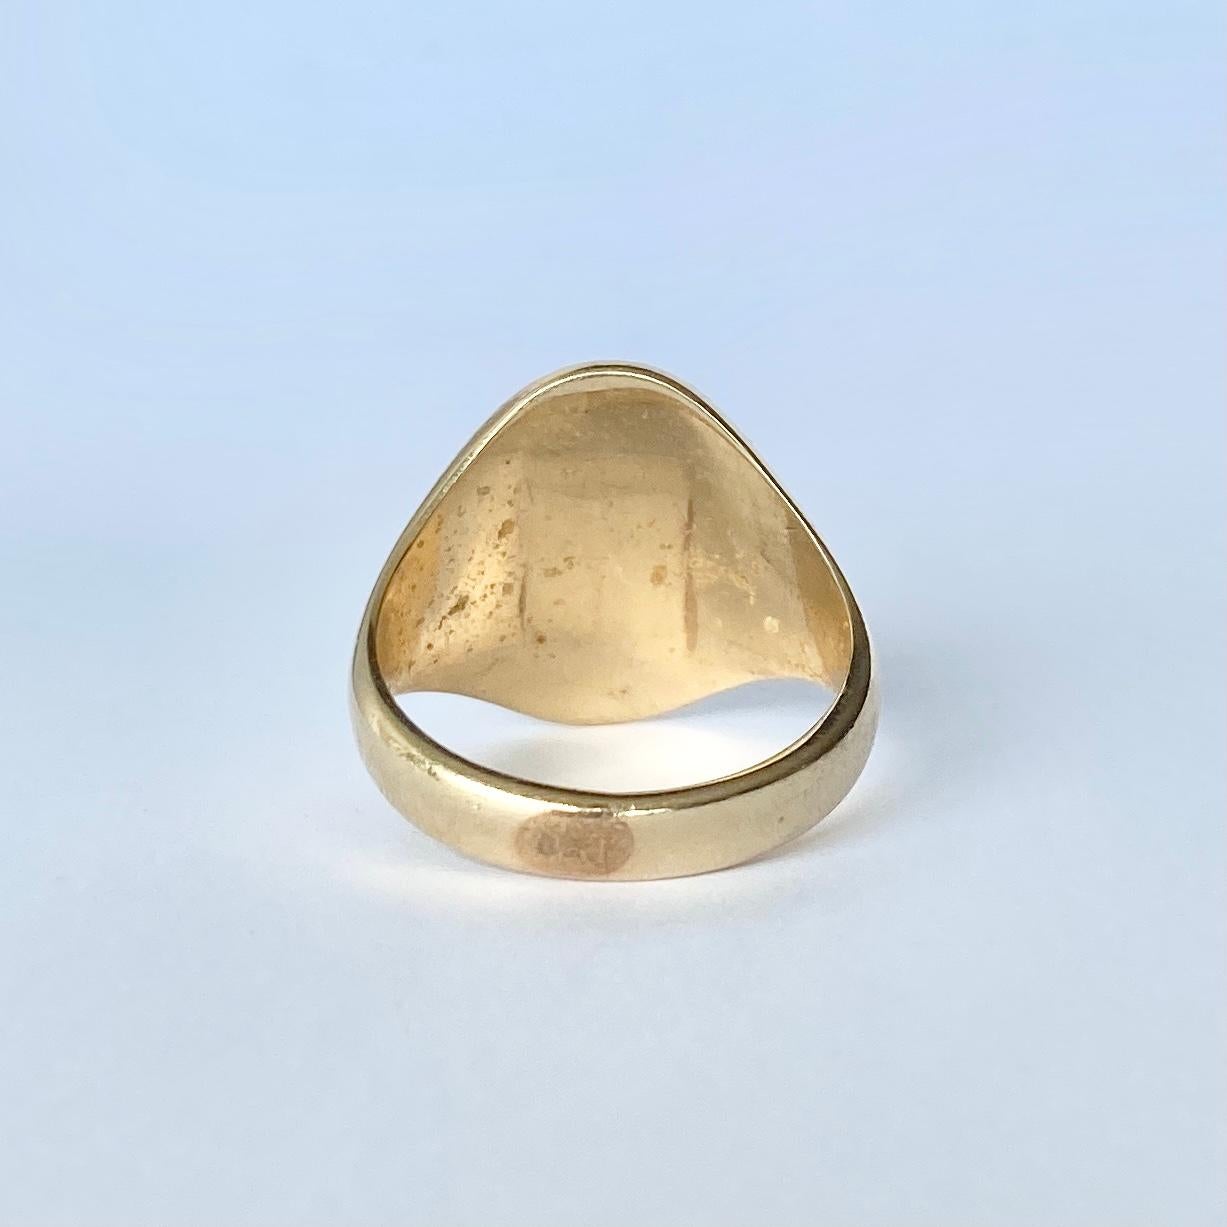 The design on the front of this signet is the coat of arms worn by the Scottish Clan Lindsay.  Modelled in 9carat gold.

Ring Size: S 1/2 or 9 1/4 
Face Dimensions: 19x14mm 

Weight: 9.7g